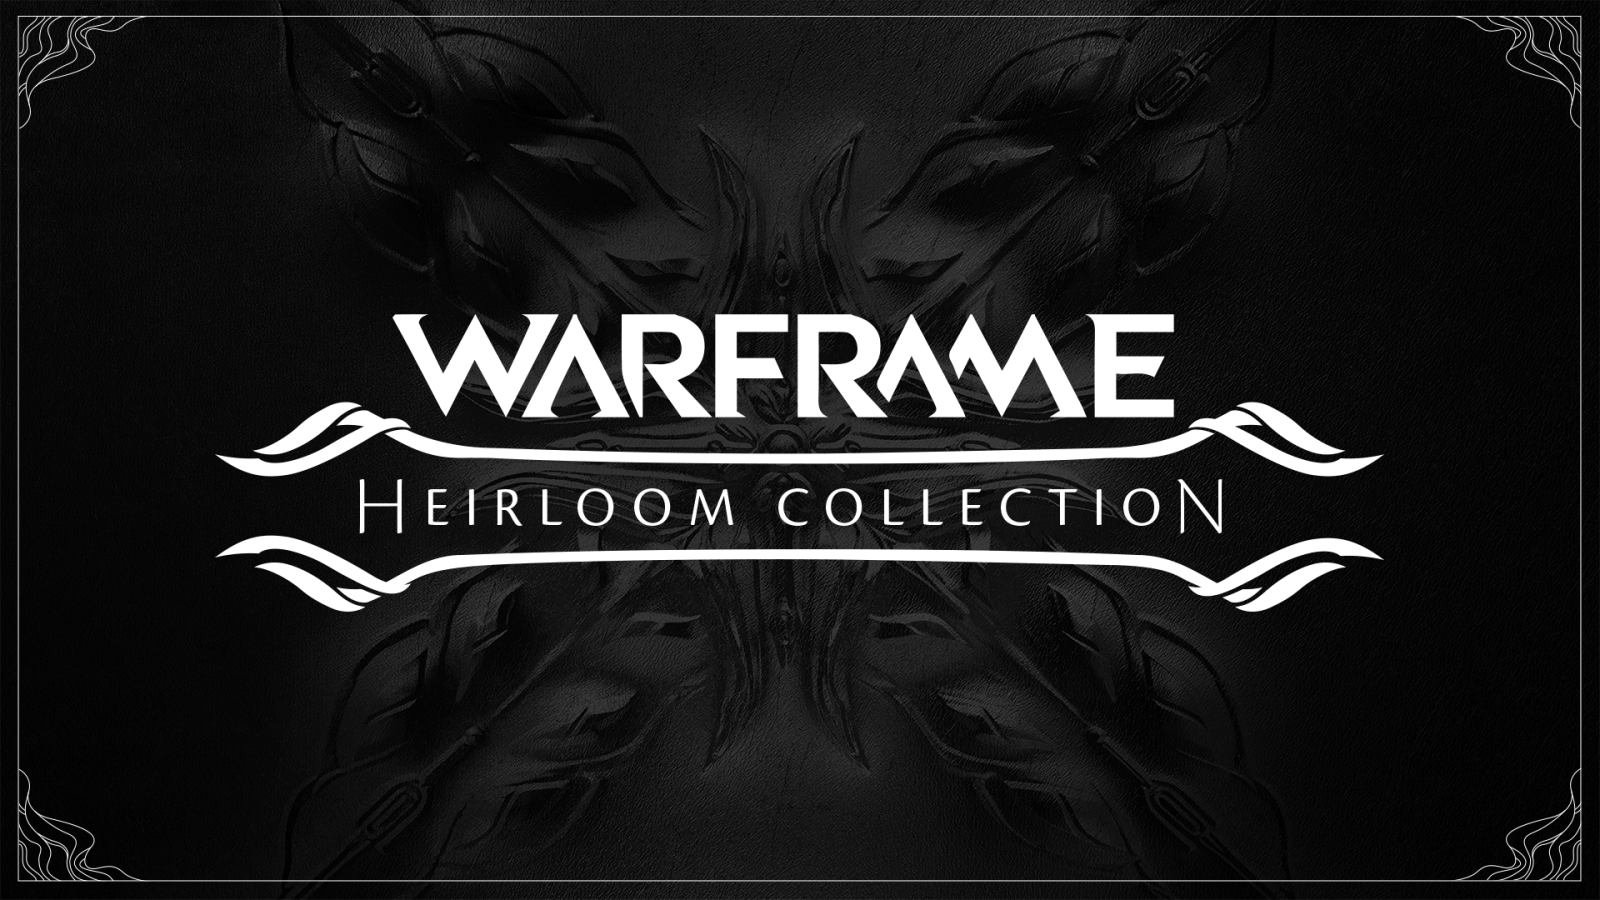 Heirloom Collections FAQ